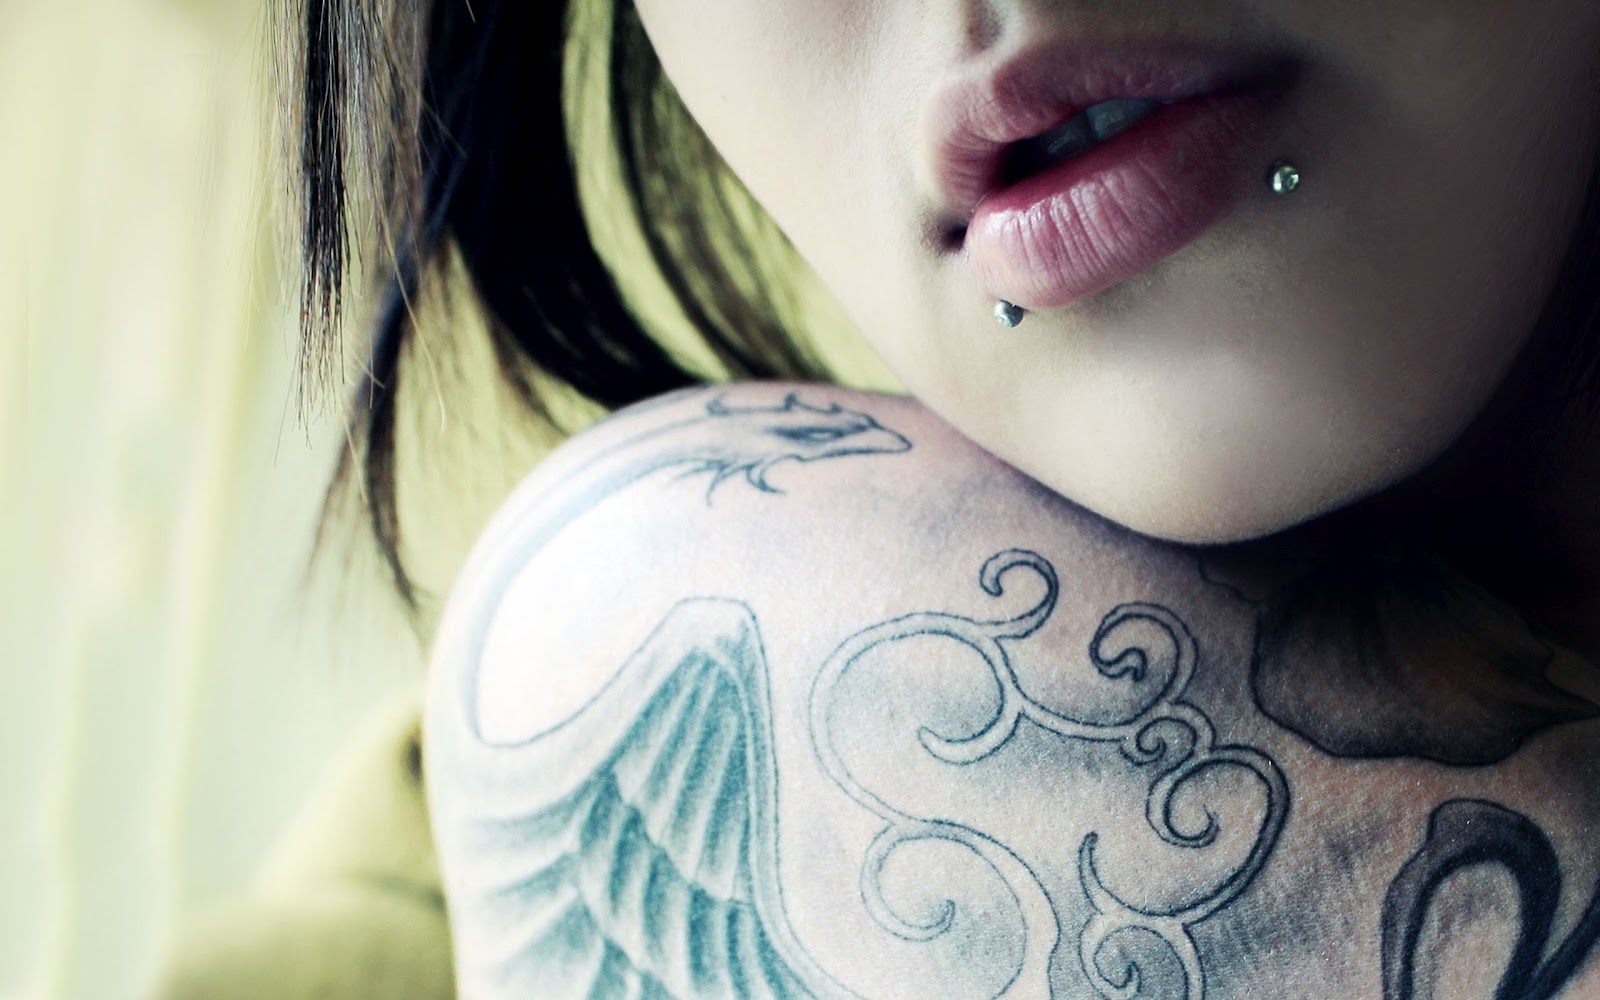 Wallpaper Collection For Your Computer And Mobile Phones Arm And Hand Tattoos For Girls 2014